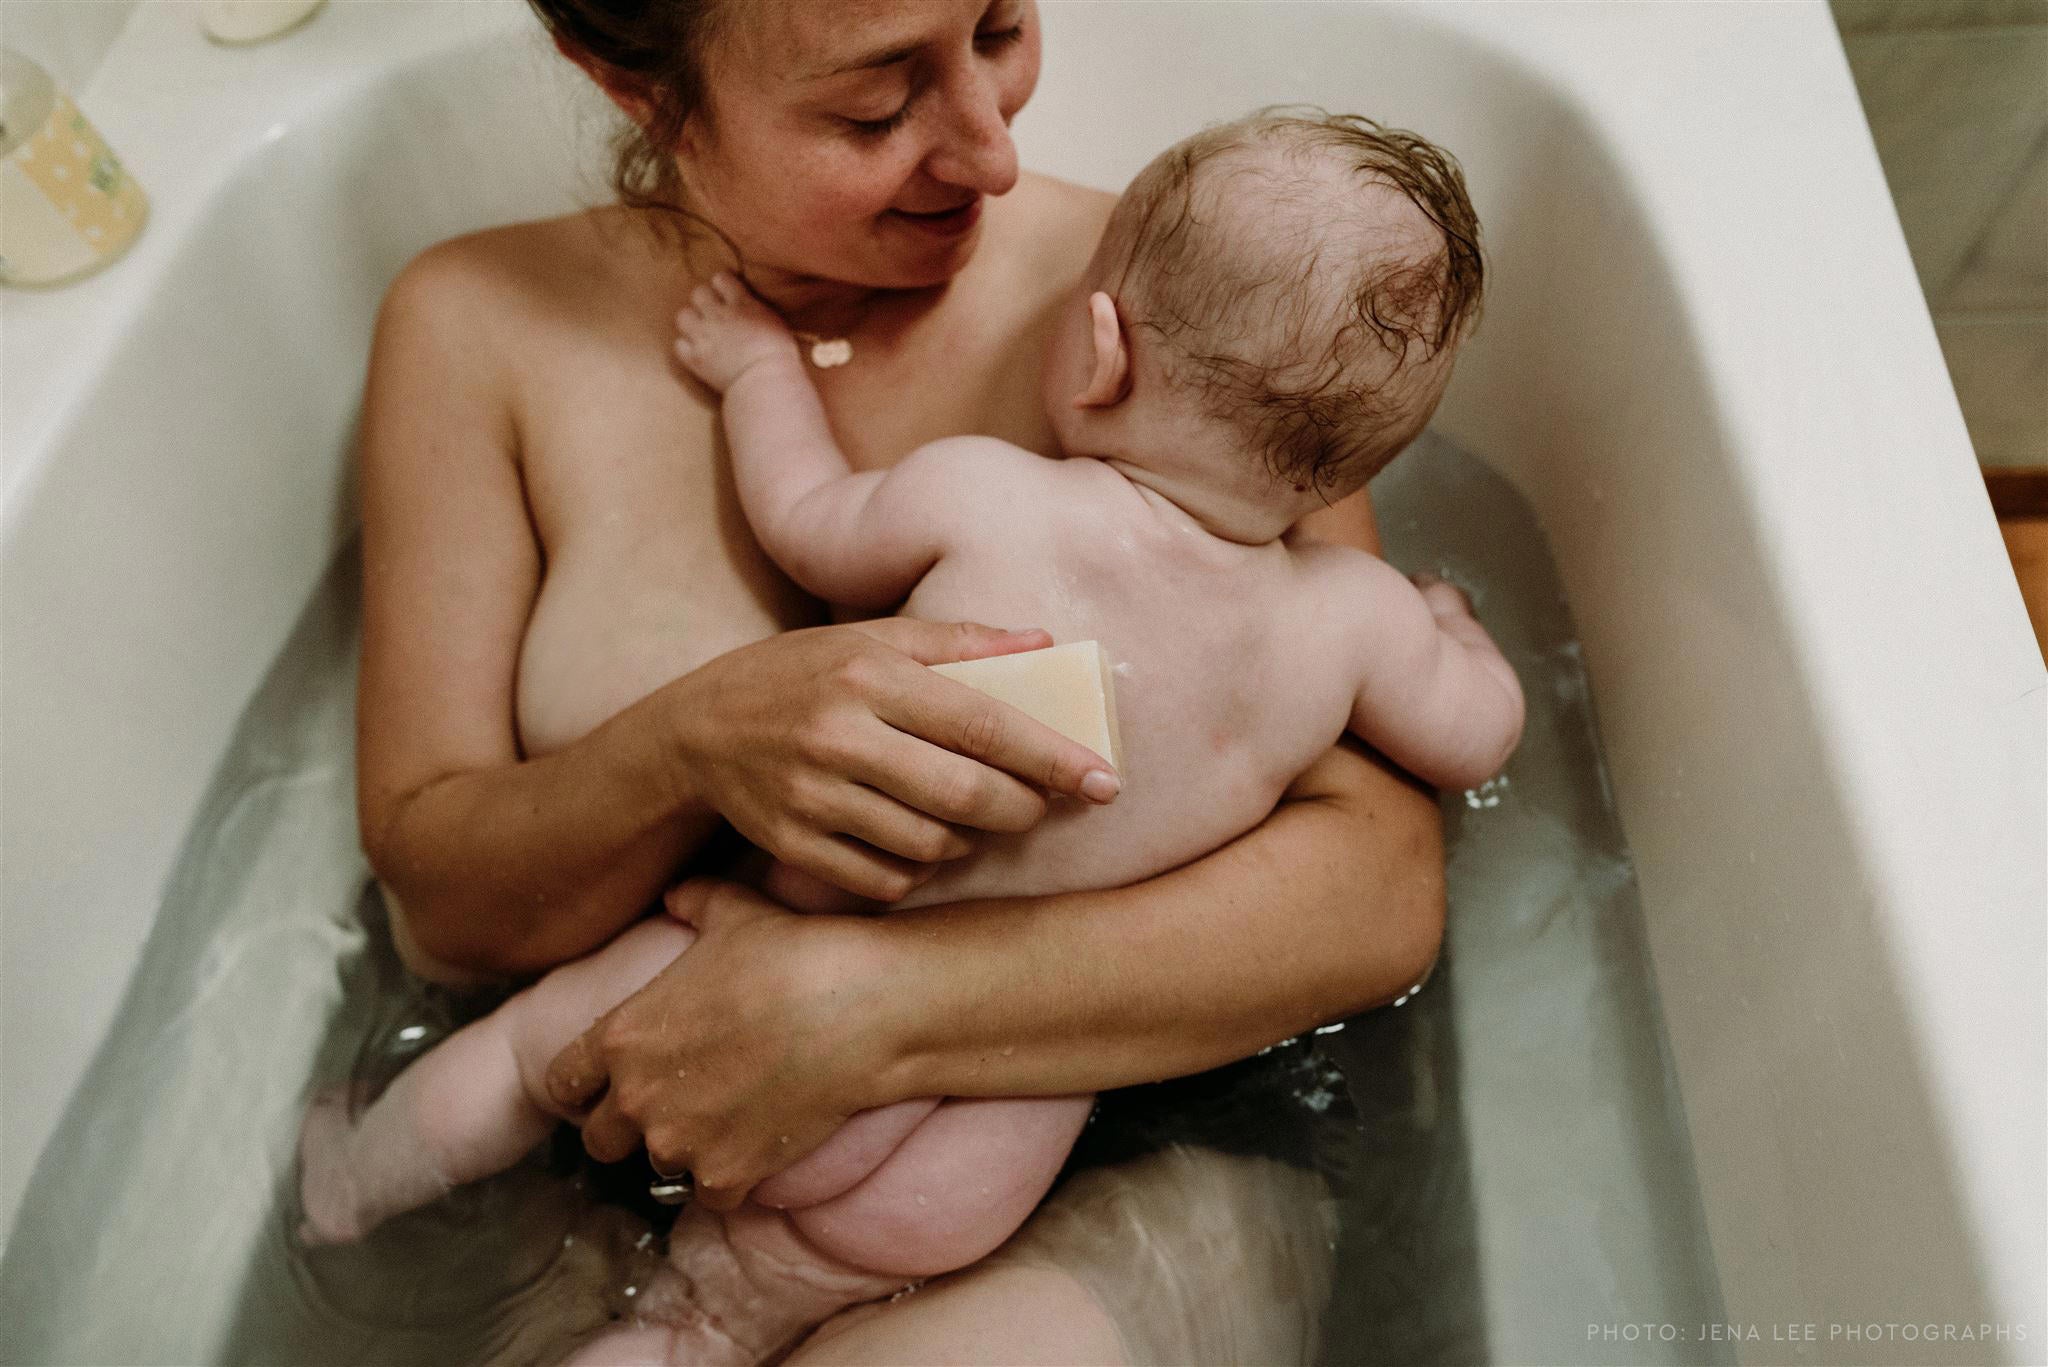 Woman in bathtub with baby lying on her chest. 